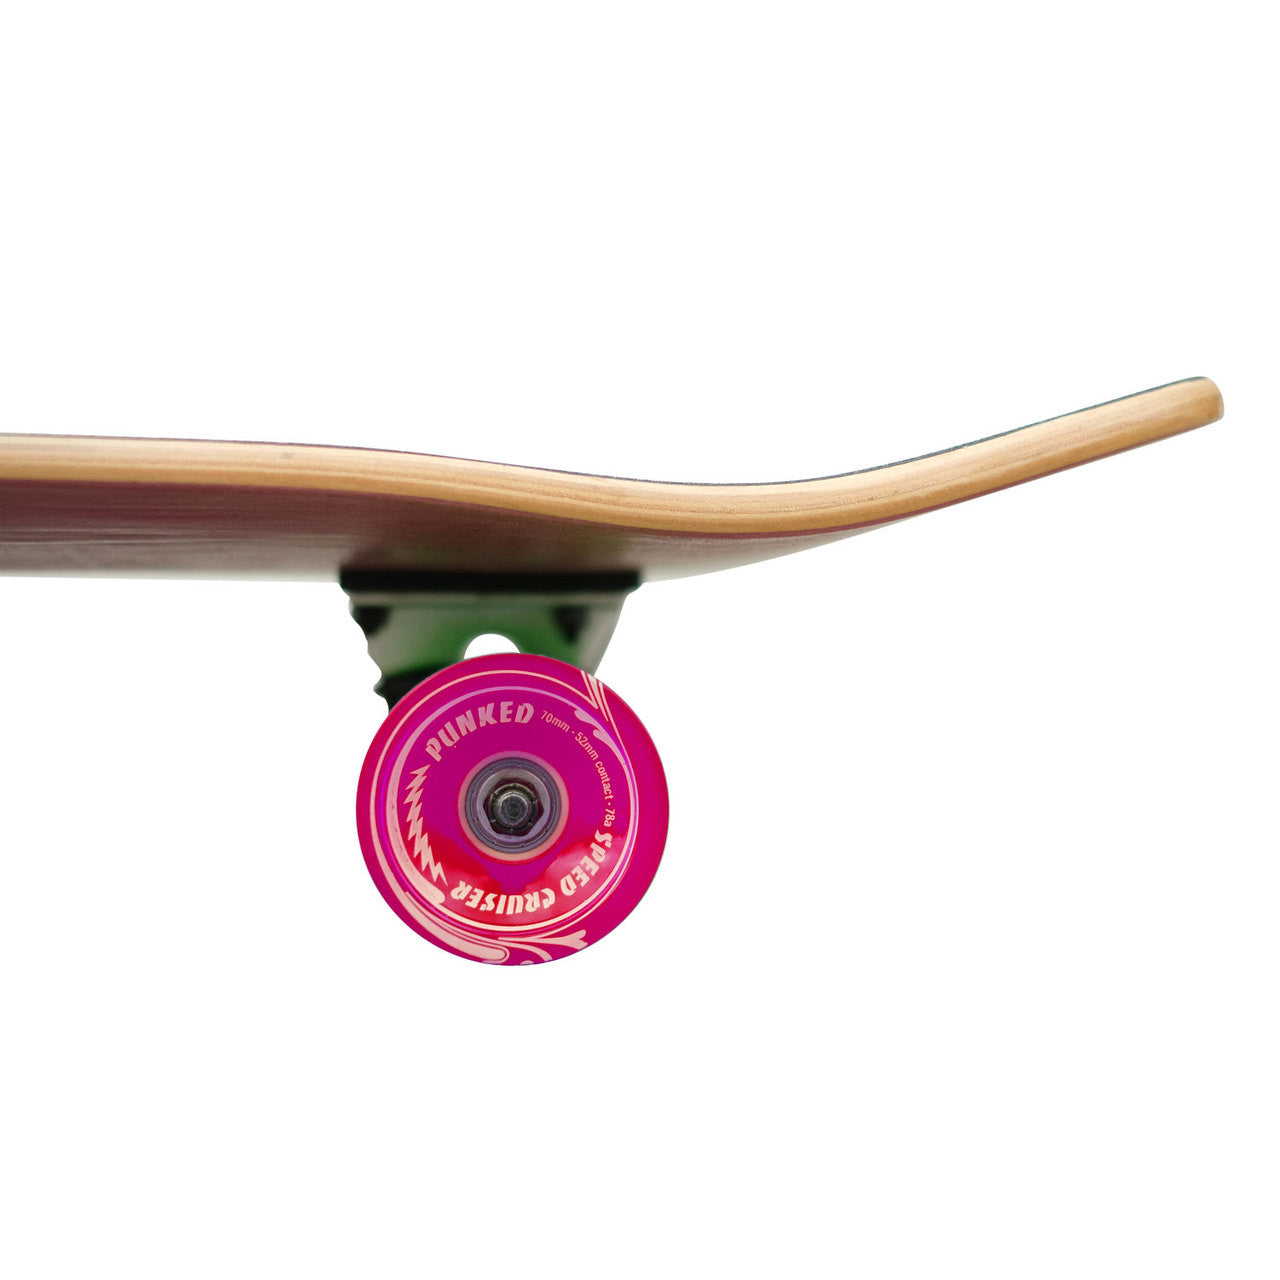 Yocaher Old School Longboard Complete - The Bird Series Green